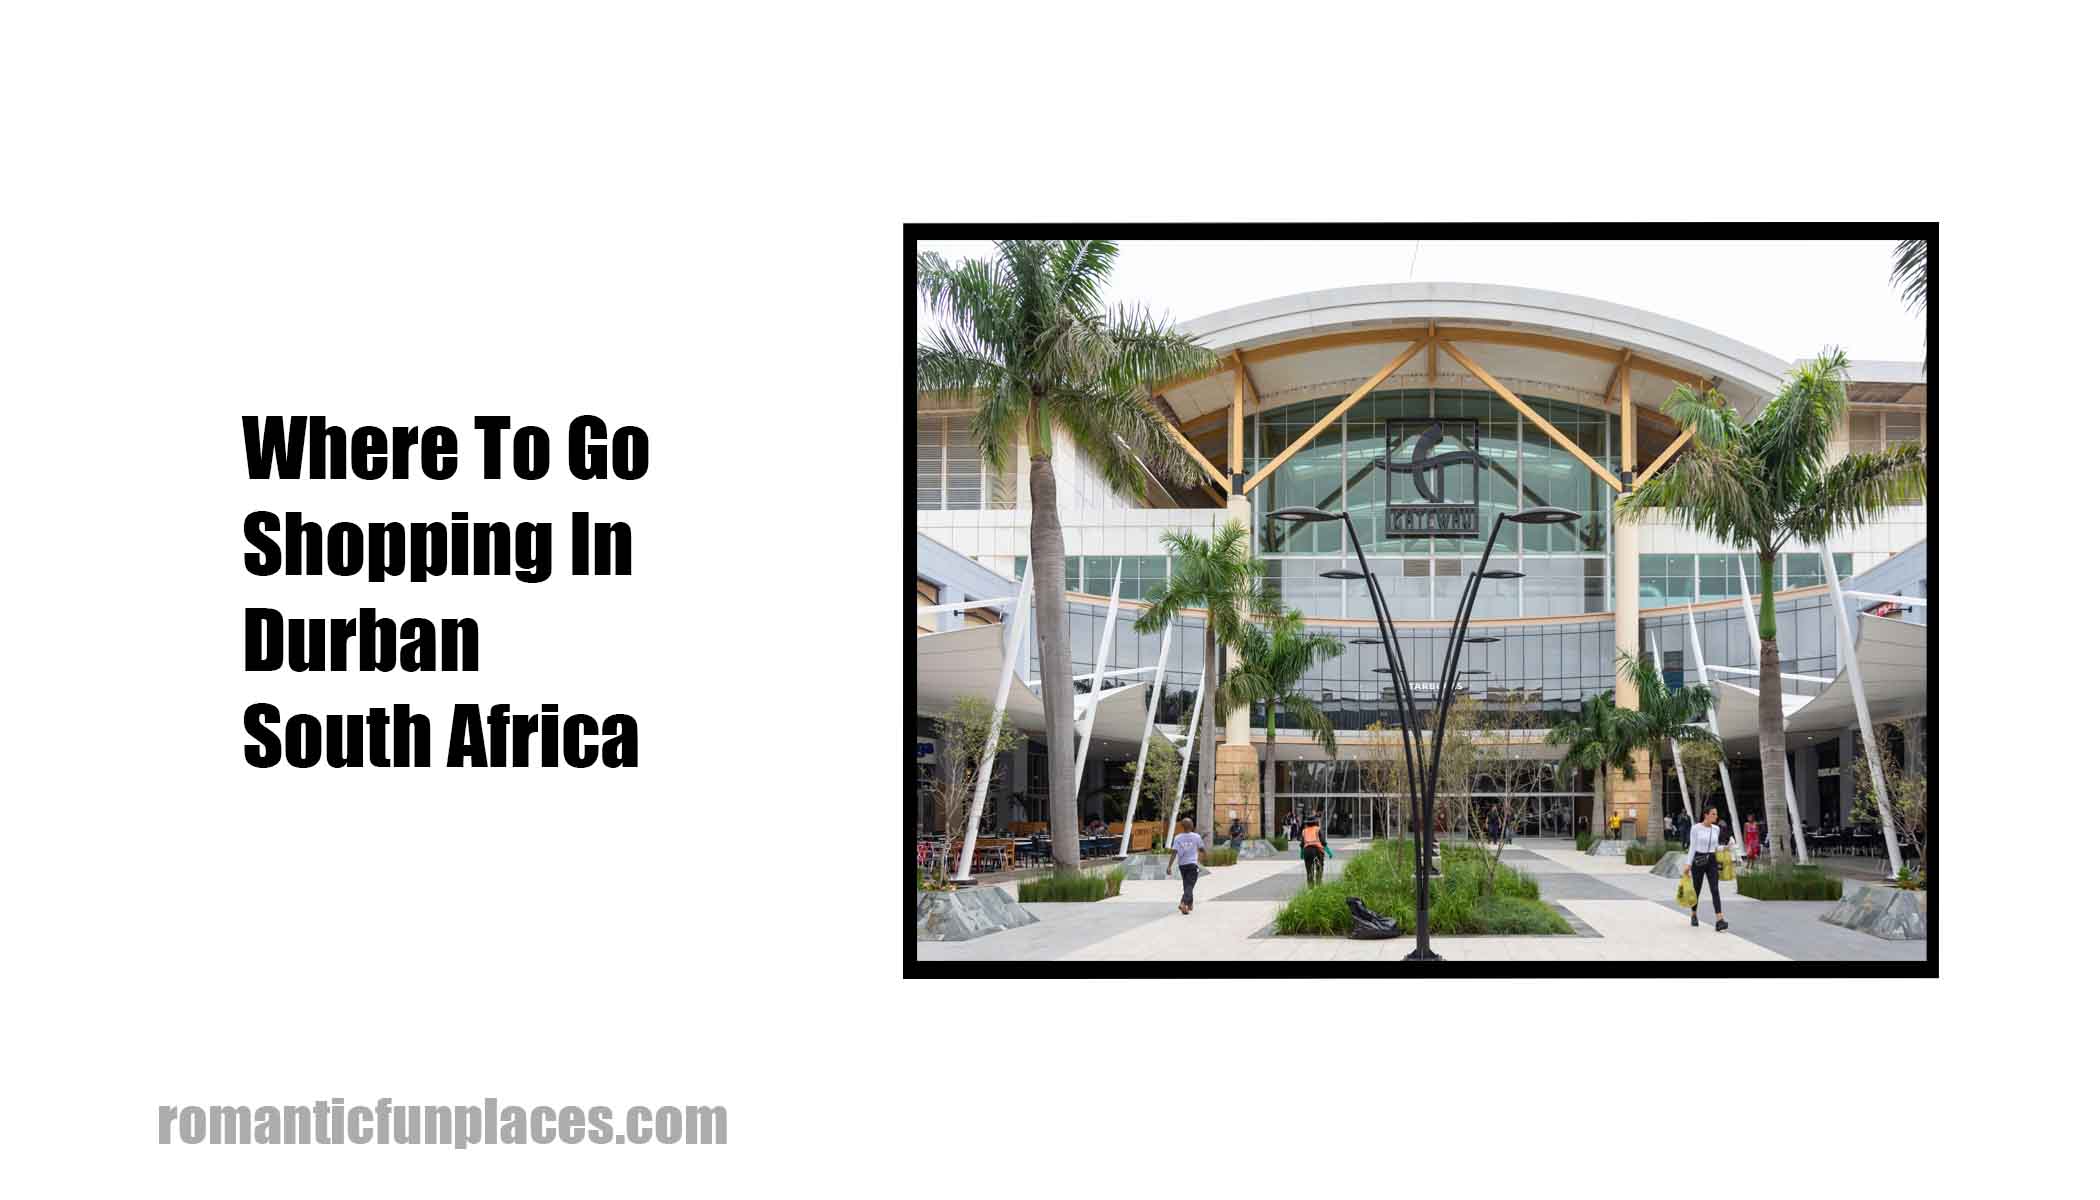 Where To Go Shopping In Durban South Africa